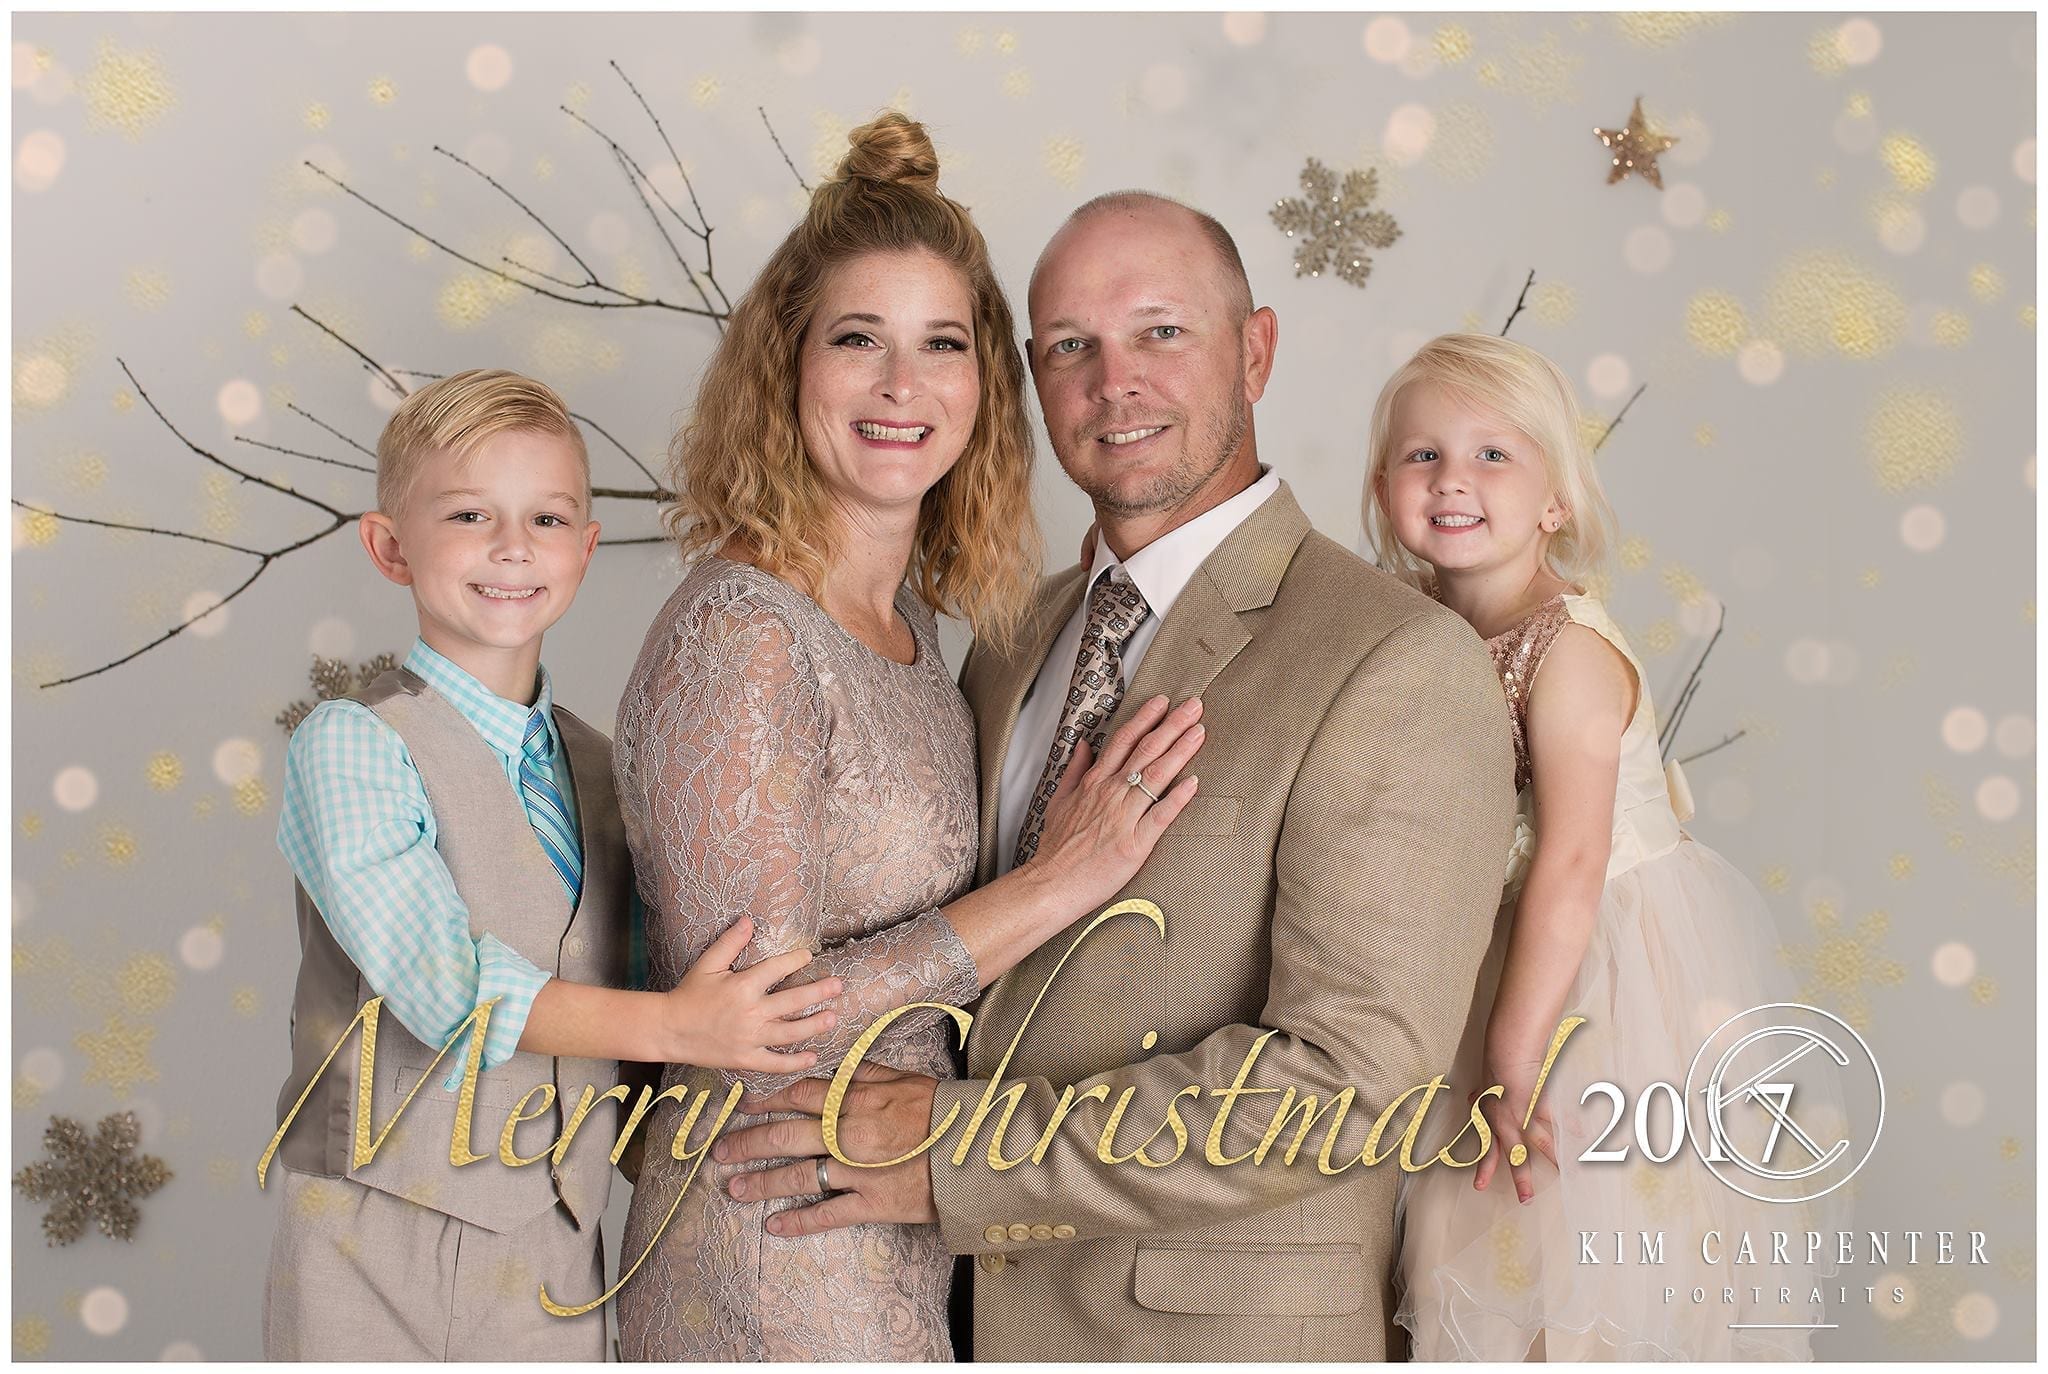 A family portrait that is Christmas themed.